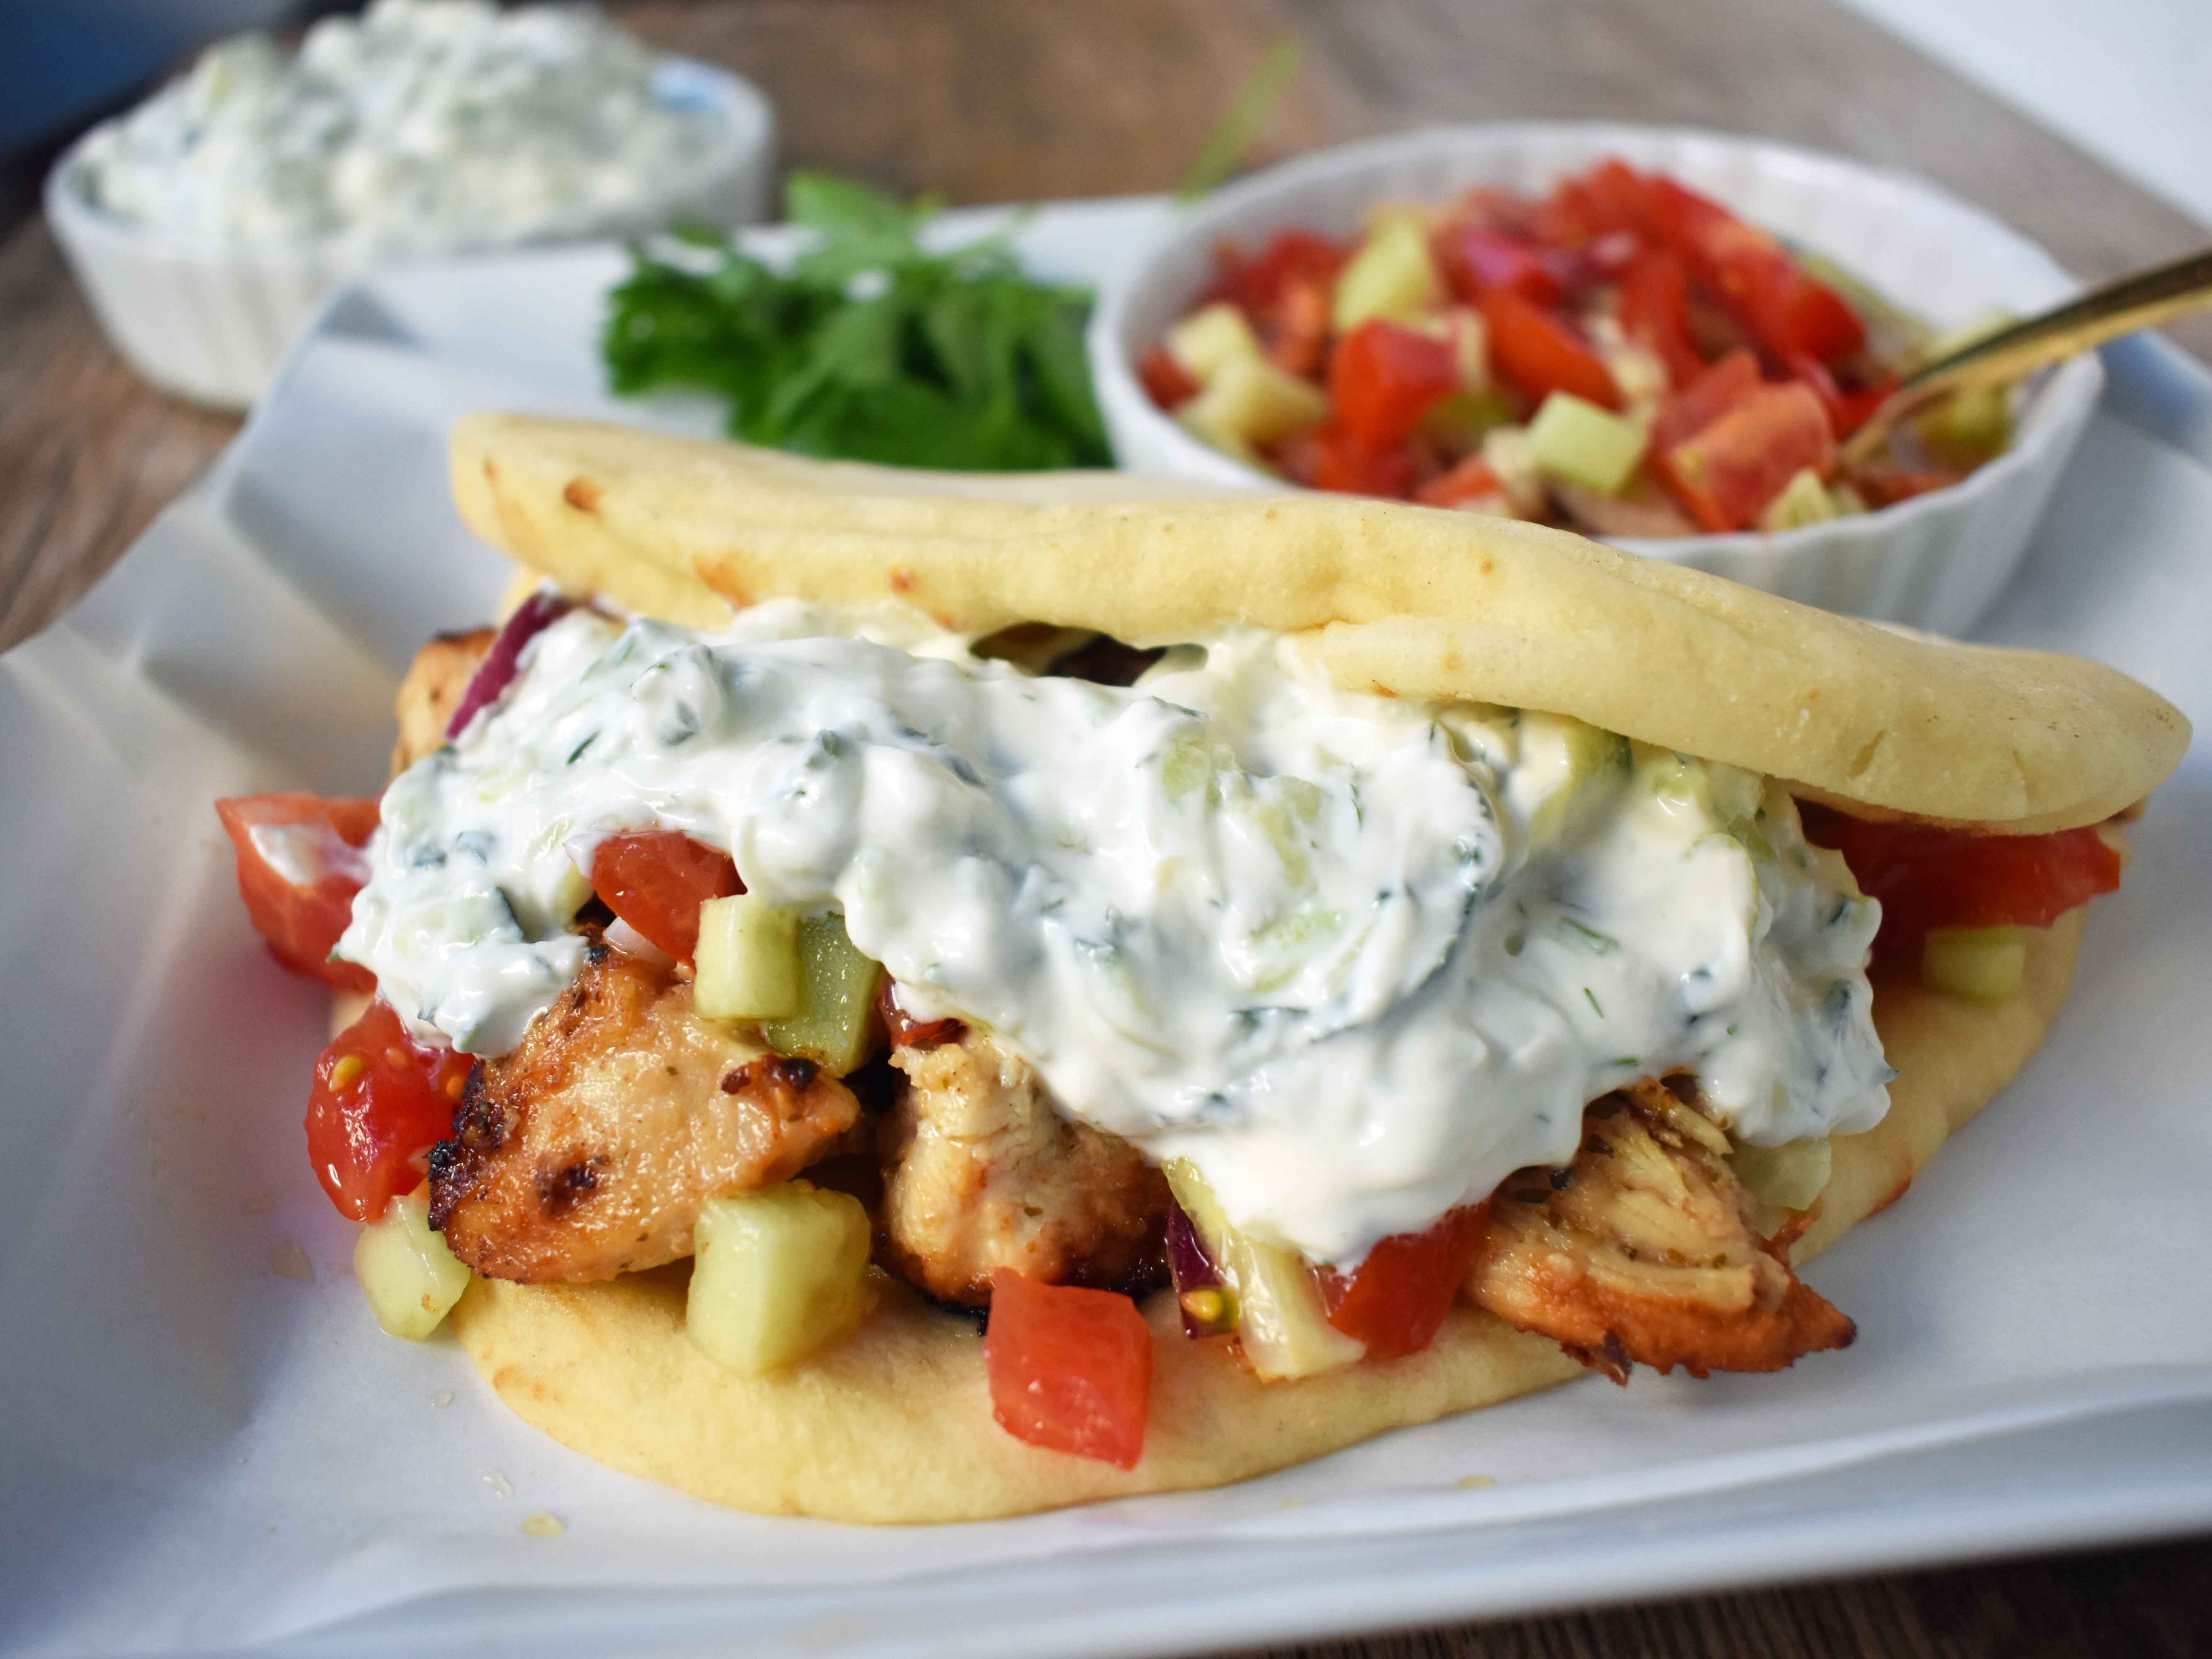 Greek Chicken Gyros with Tzatziki Sauce. Marinated Greek Chicken, grilled to perfection and topped with homemade tzatziki sauce and fresh Greek salad. A healthy and flavorful dish. www.modernhoney.com